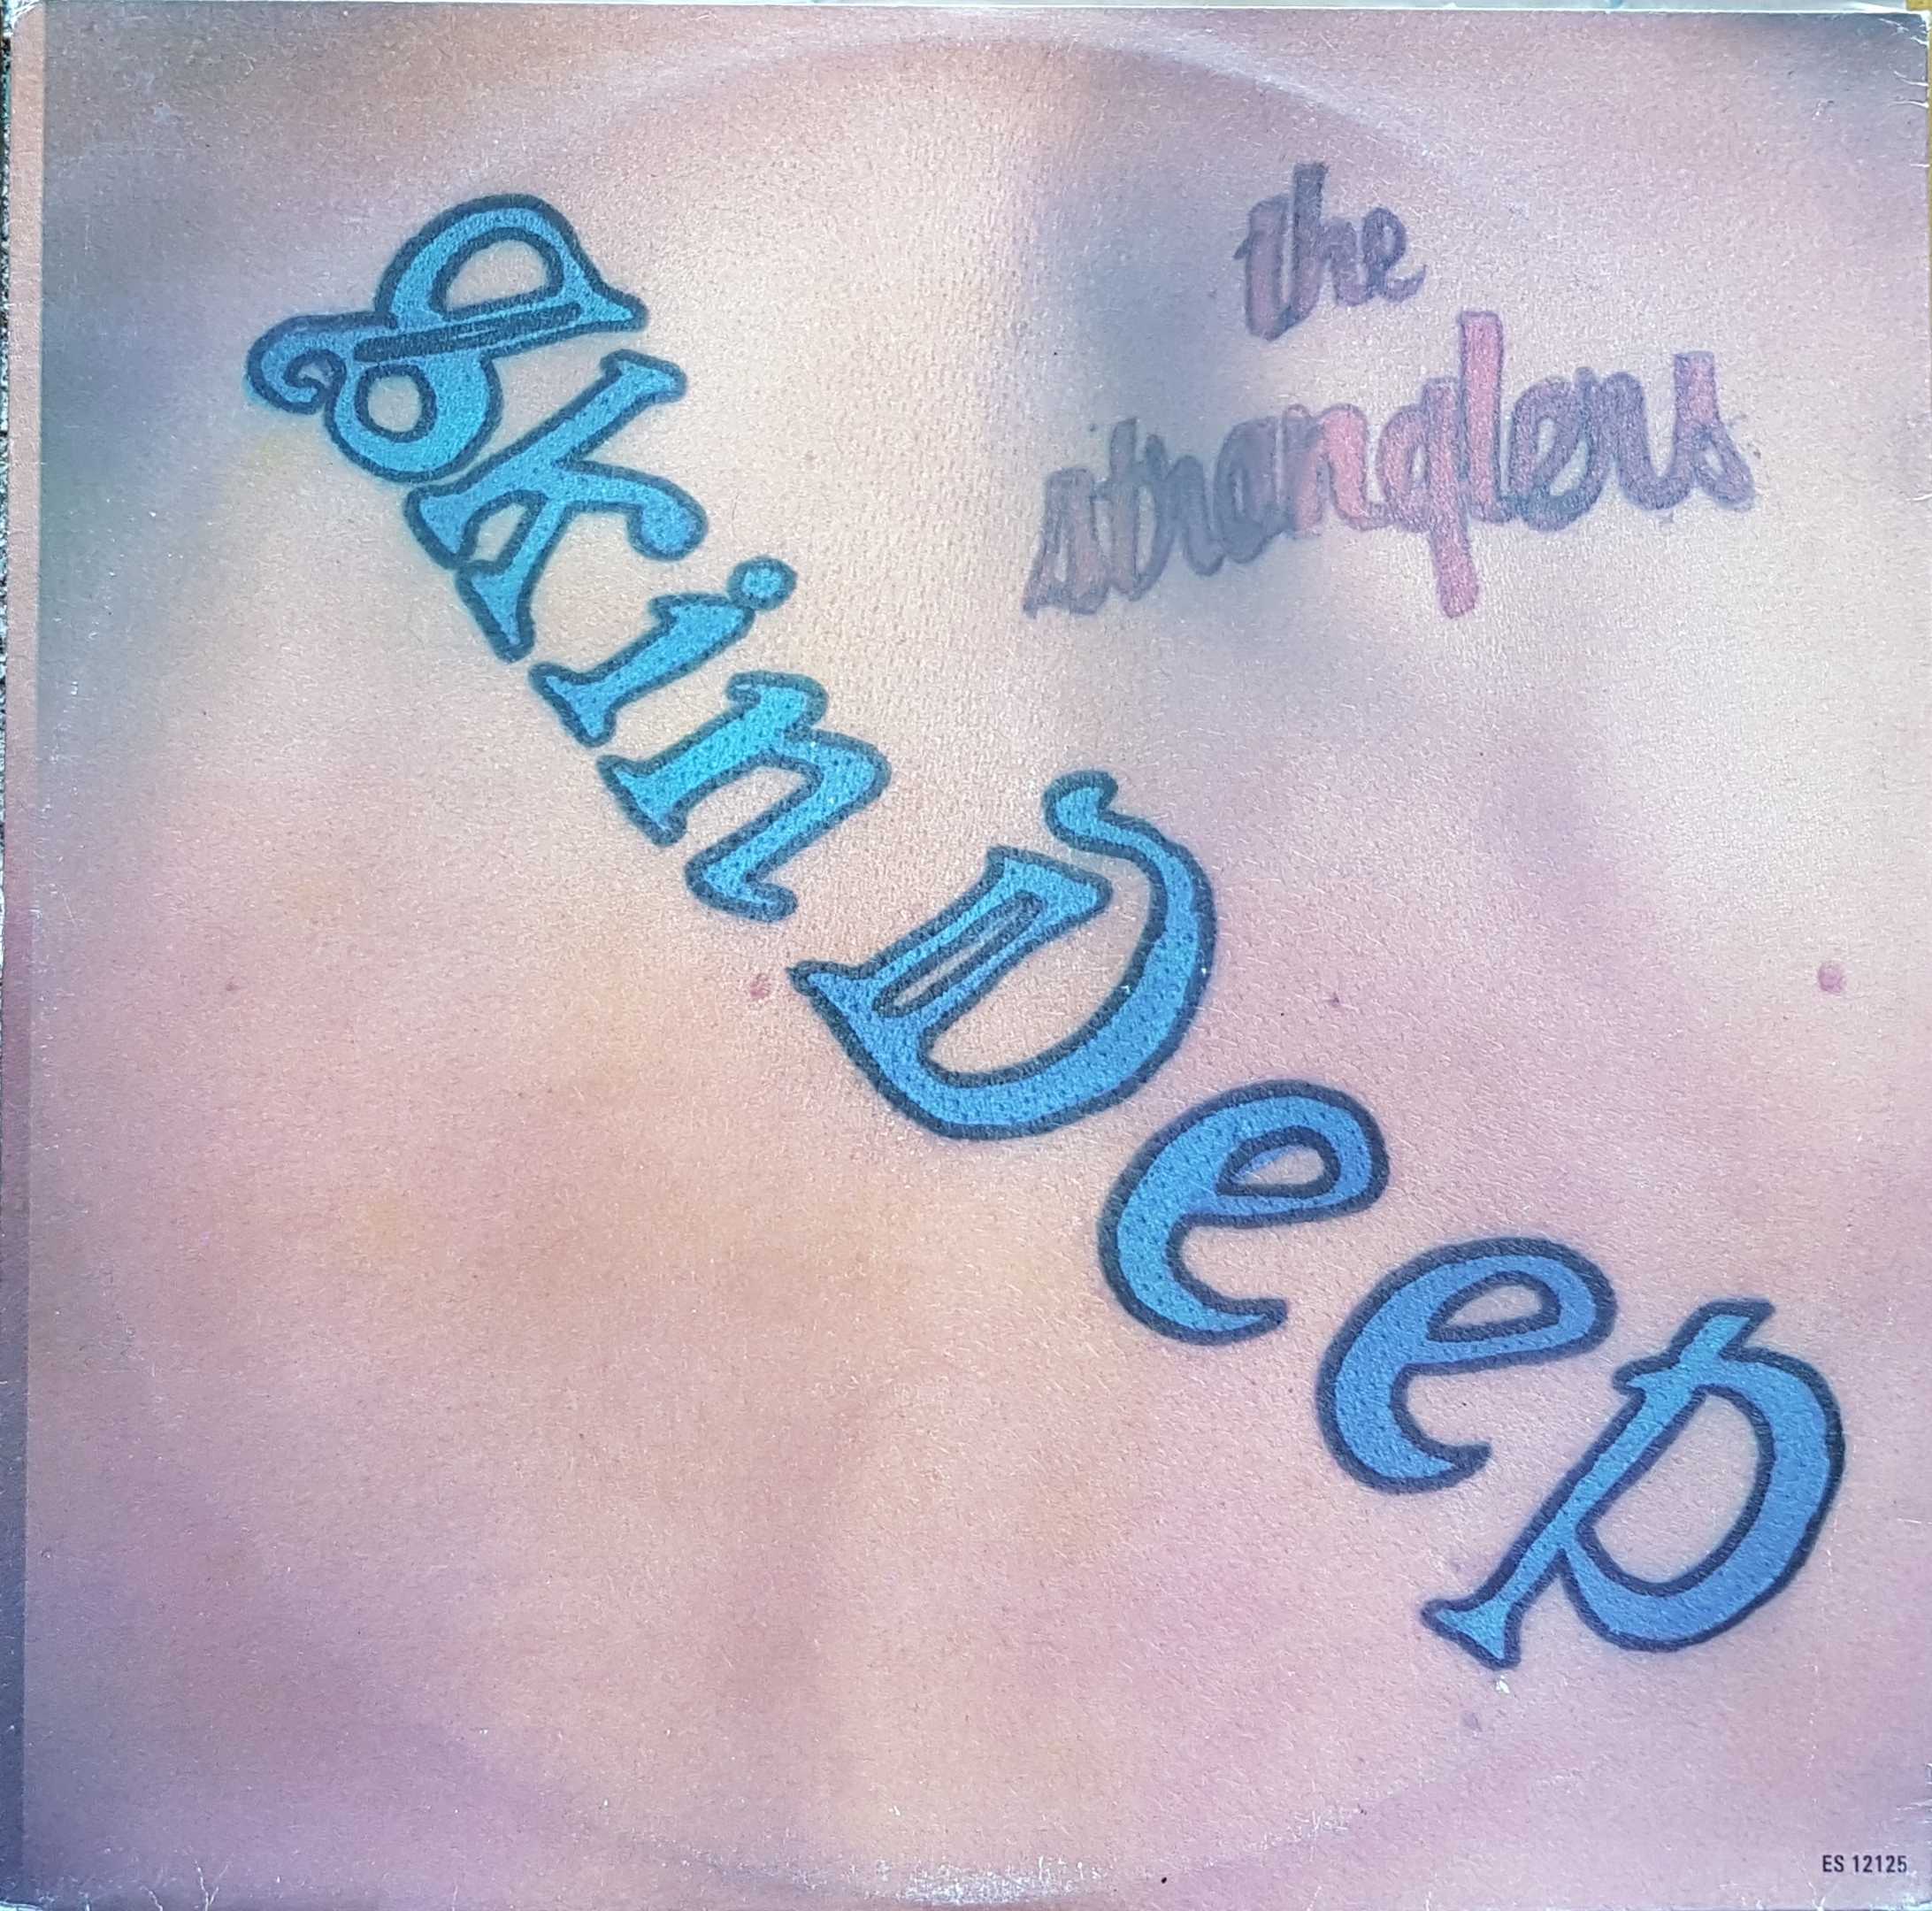 Picture of Skin deep by artist The Stranglers from The Stranglers 12inches